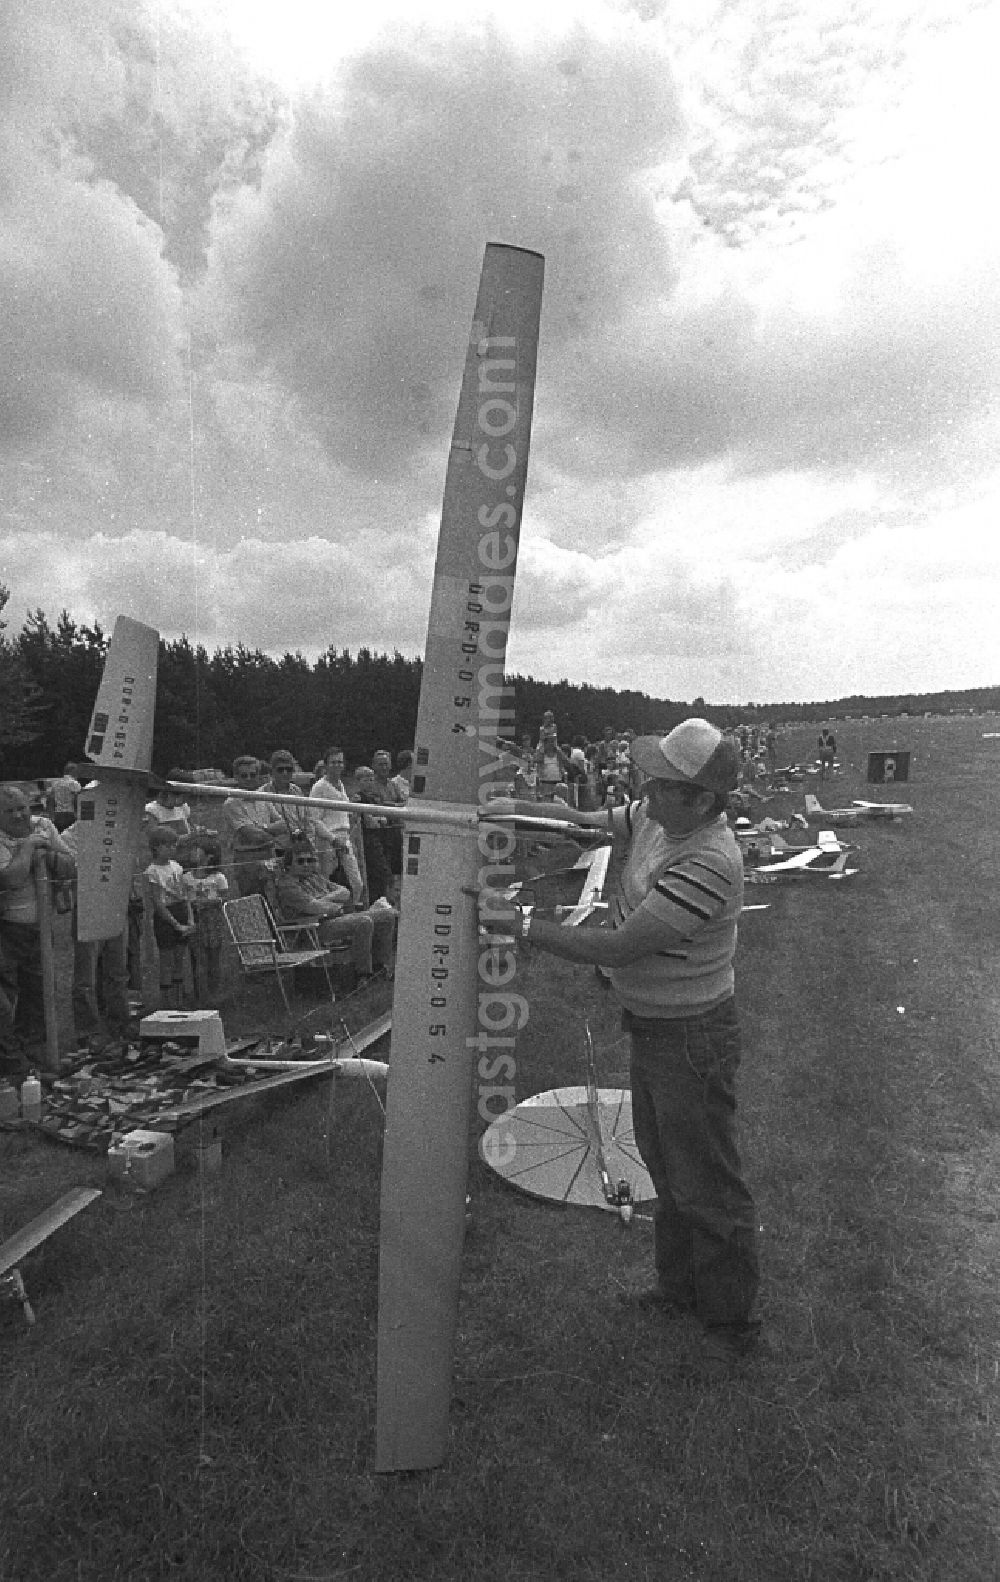 GDR photo archive: Borkheide - Event and demonstration at the airfield festival on the 75th anniversary of the first German post flight in Borkheide in the state of Brandenburg in the area of the former GDR, German Democratic Republic